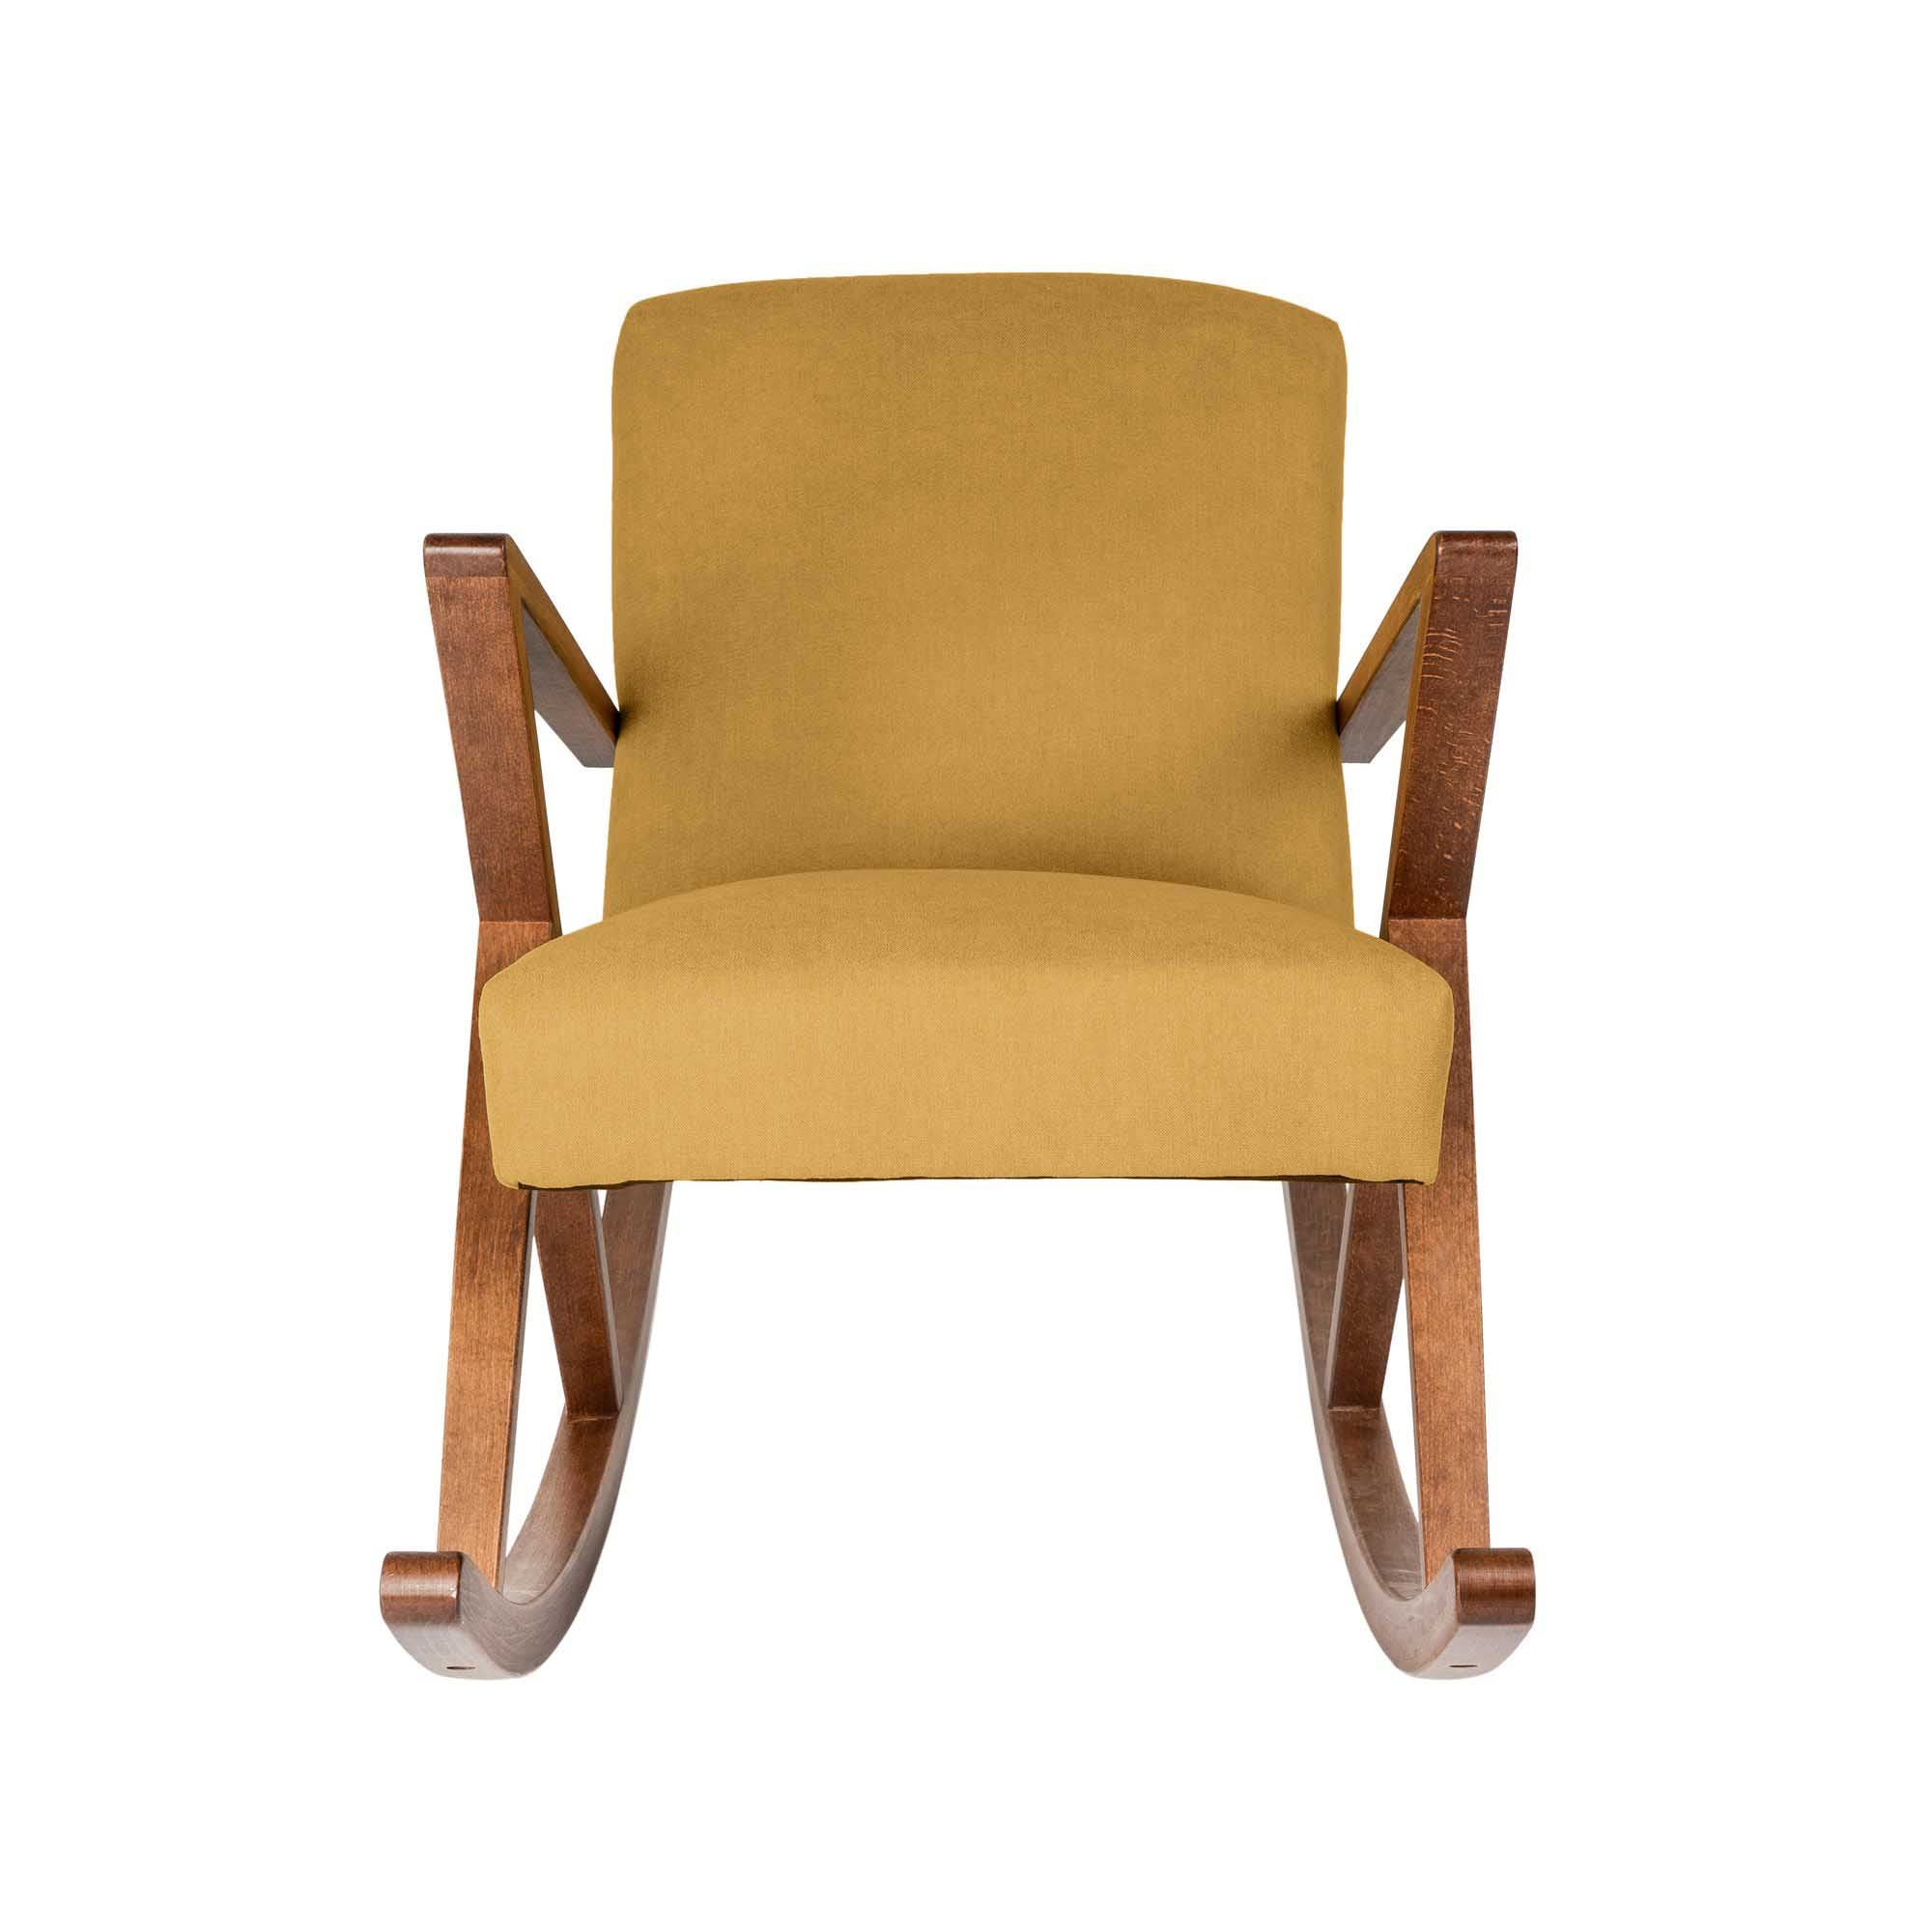  Rocking Chair, Beech Wood Frame, Walnut Colour yellow fabric, front view